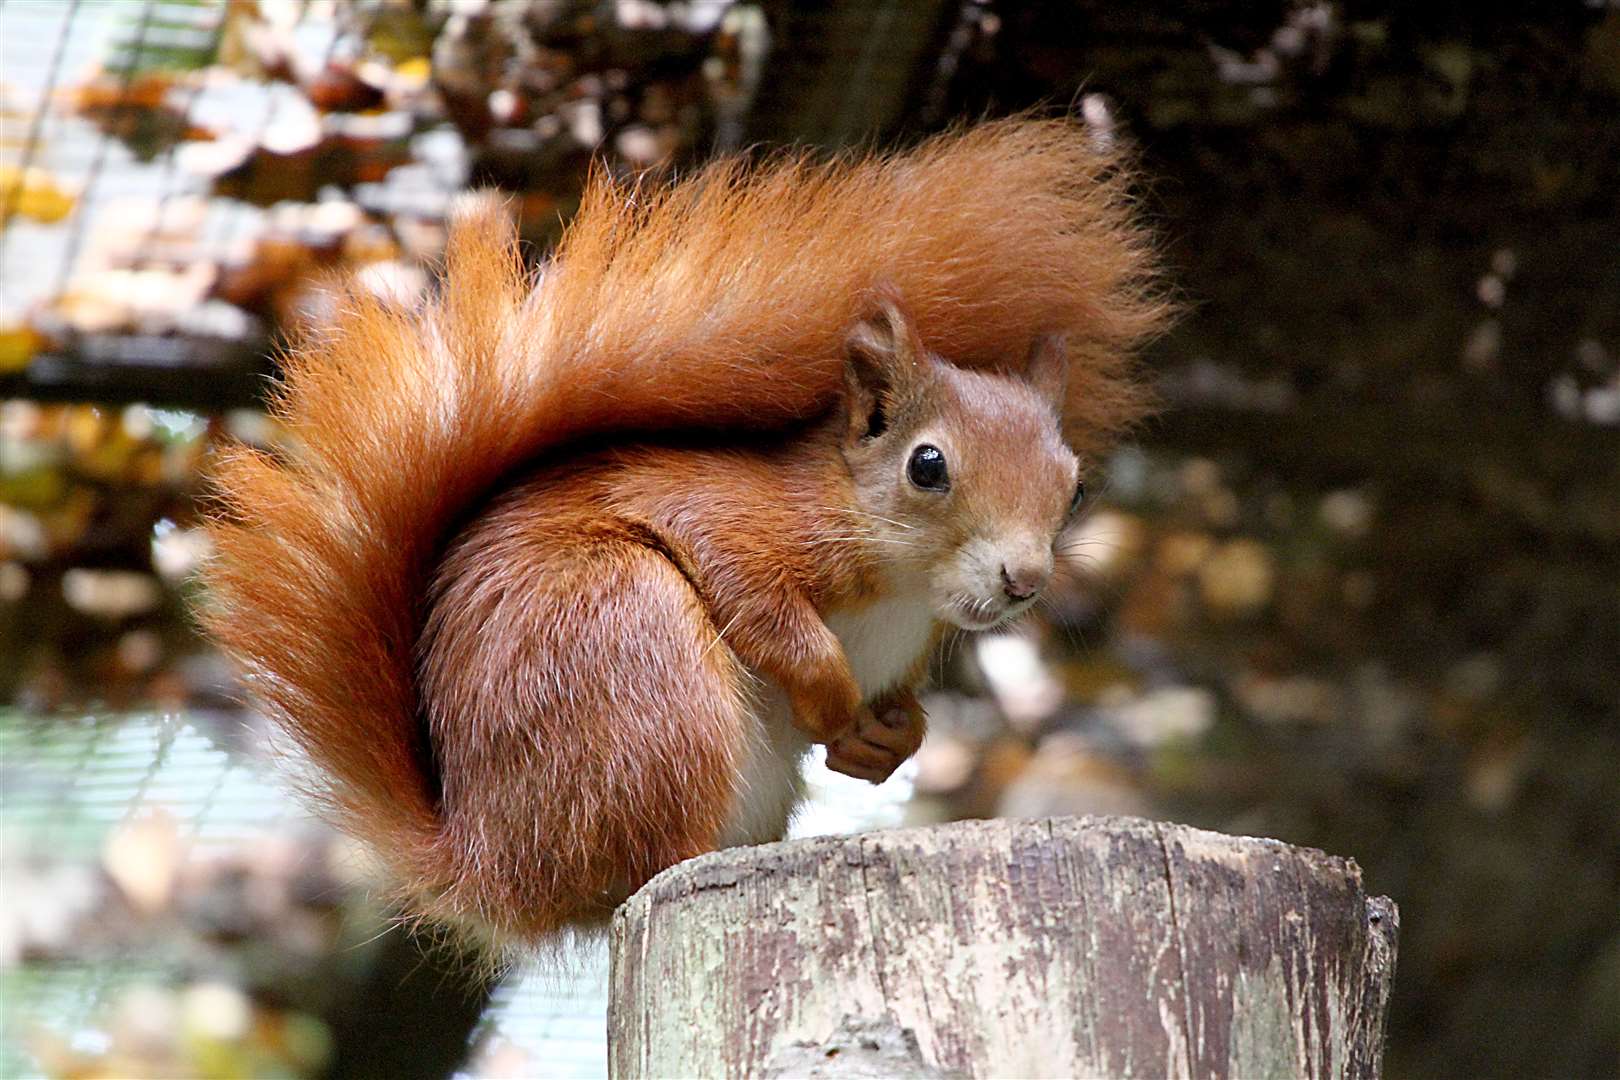 One of Wildwood Trust's red squirrels was killed in the blaze. Picture: Wildwood Trust